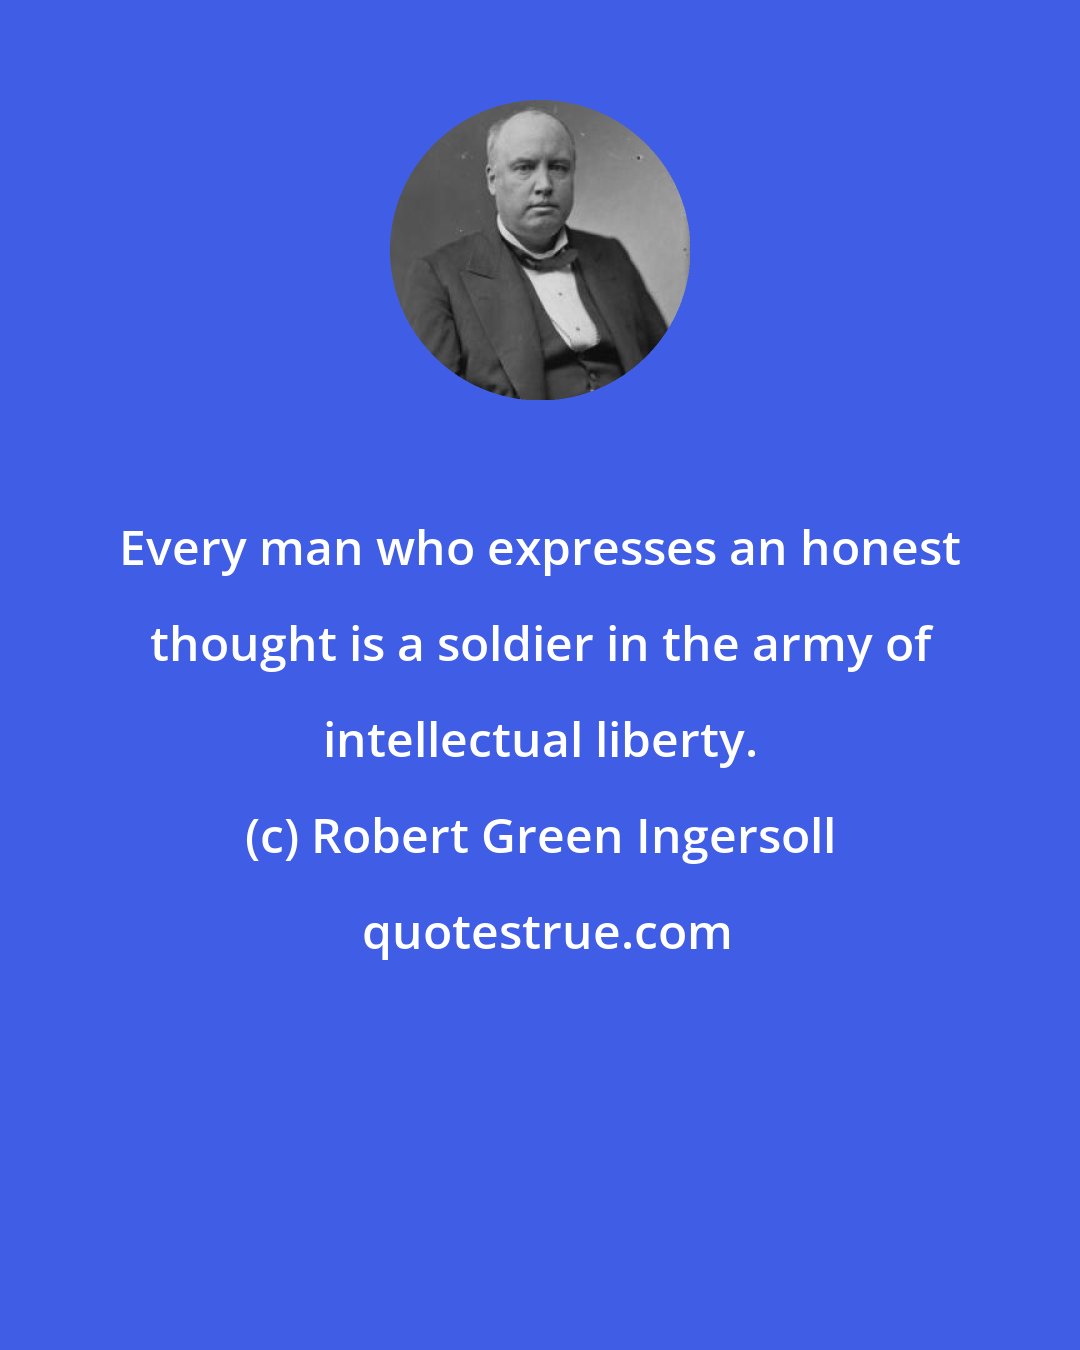 Robert Green Ingersoll: Every man who expresses an honest thought is a soldier in the army of intellectual liberty.